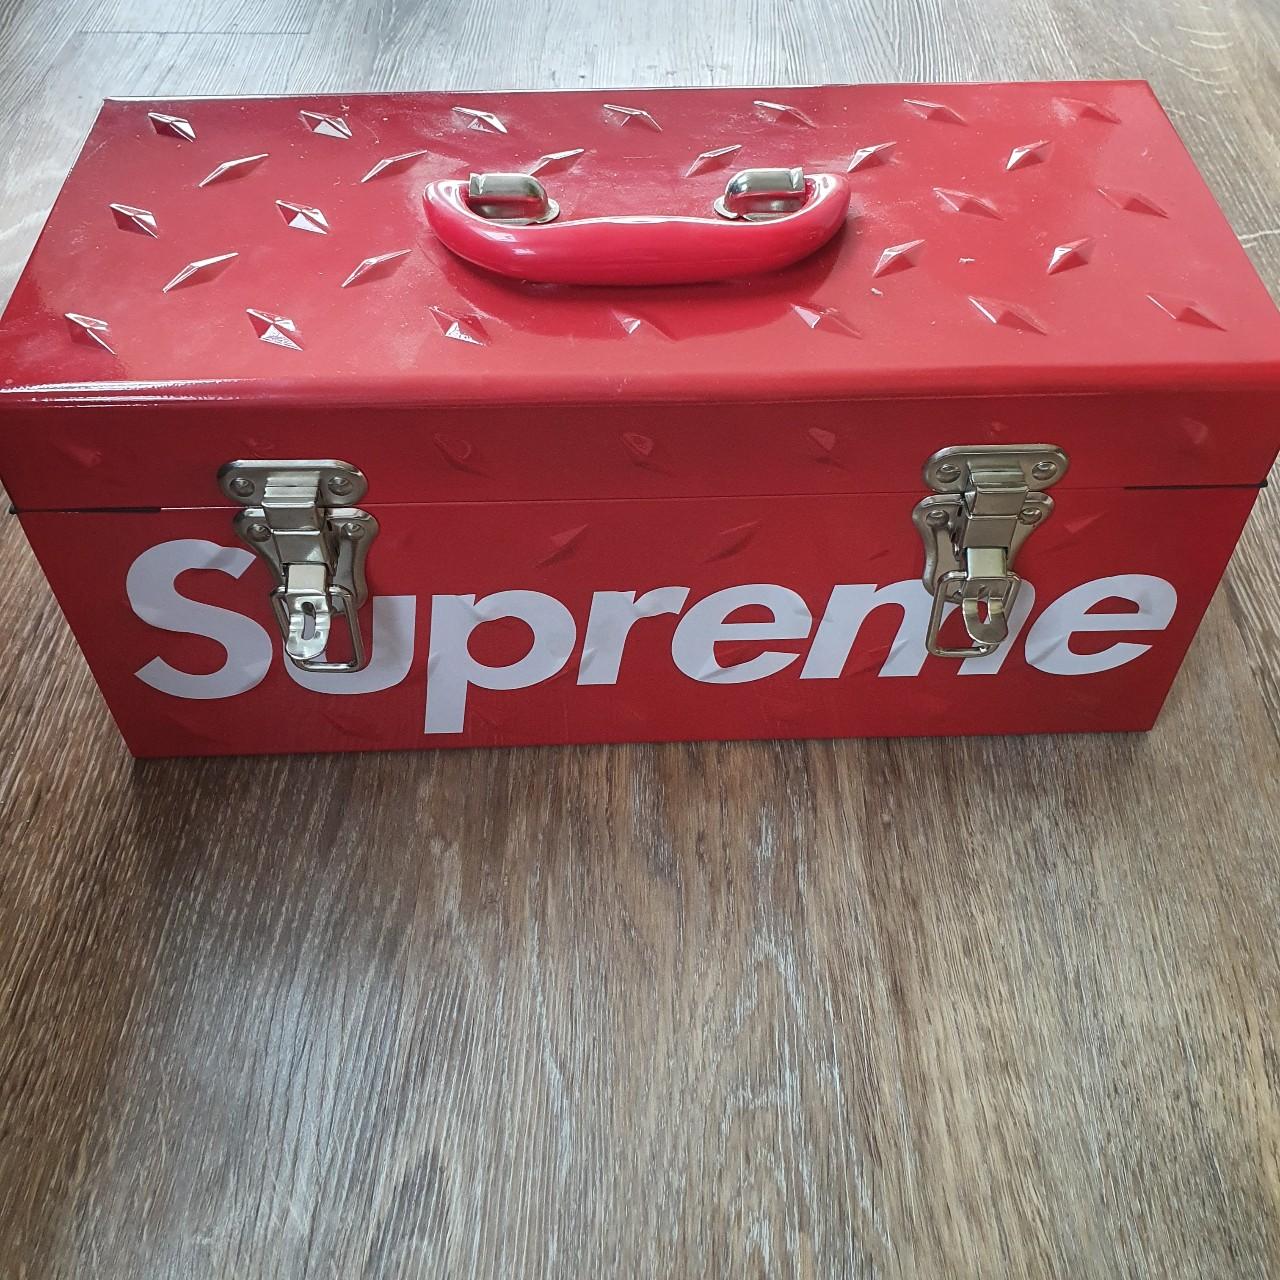 Supreme Tool box - FW18, Will ship tracked with all